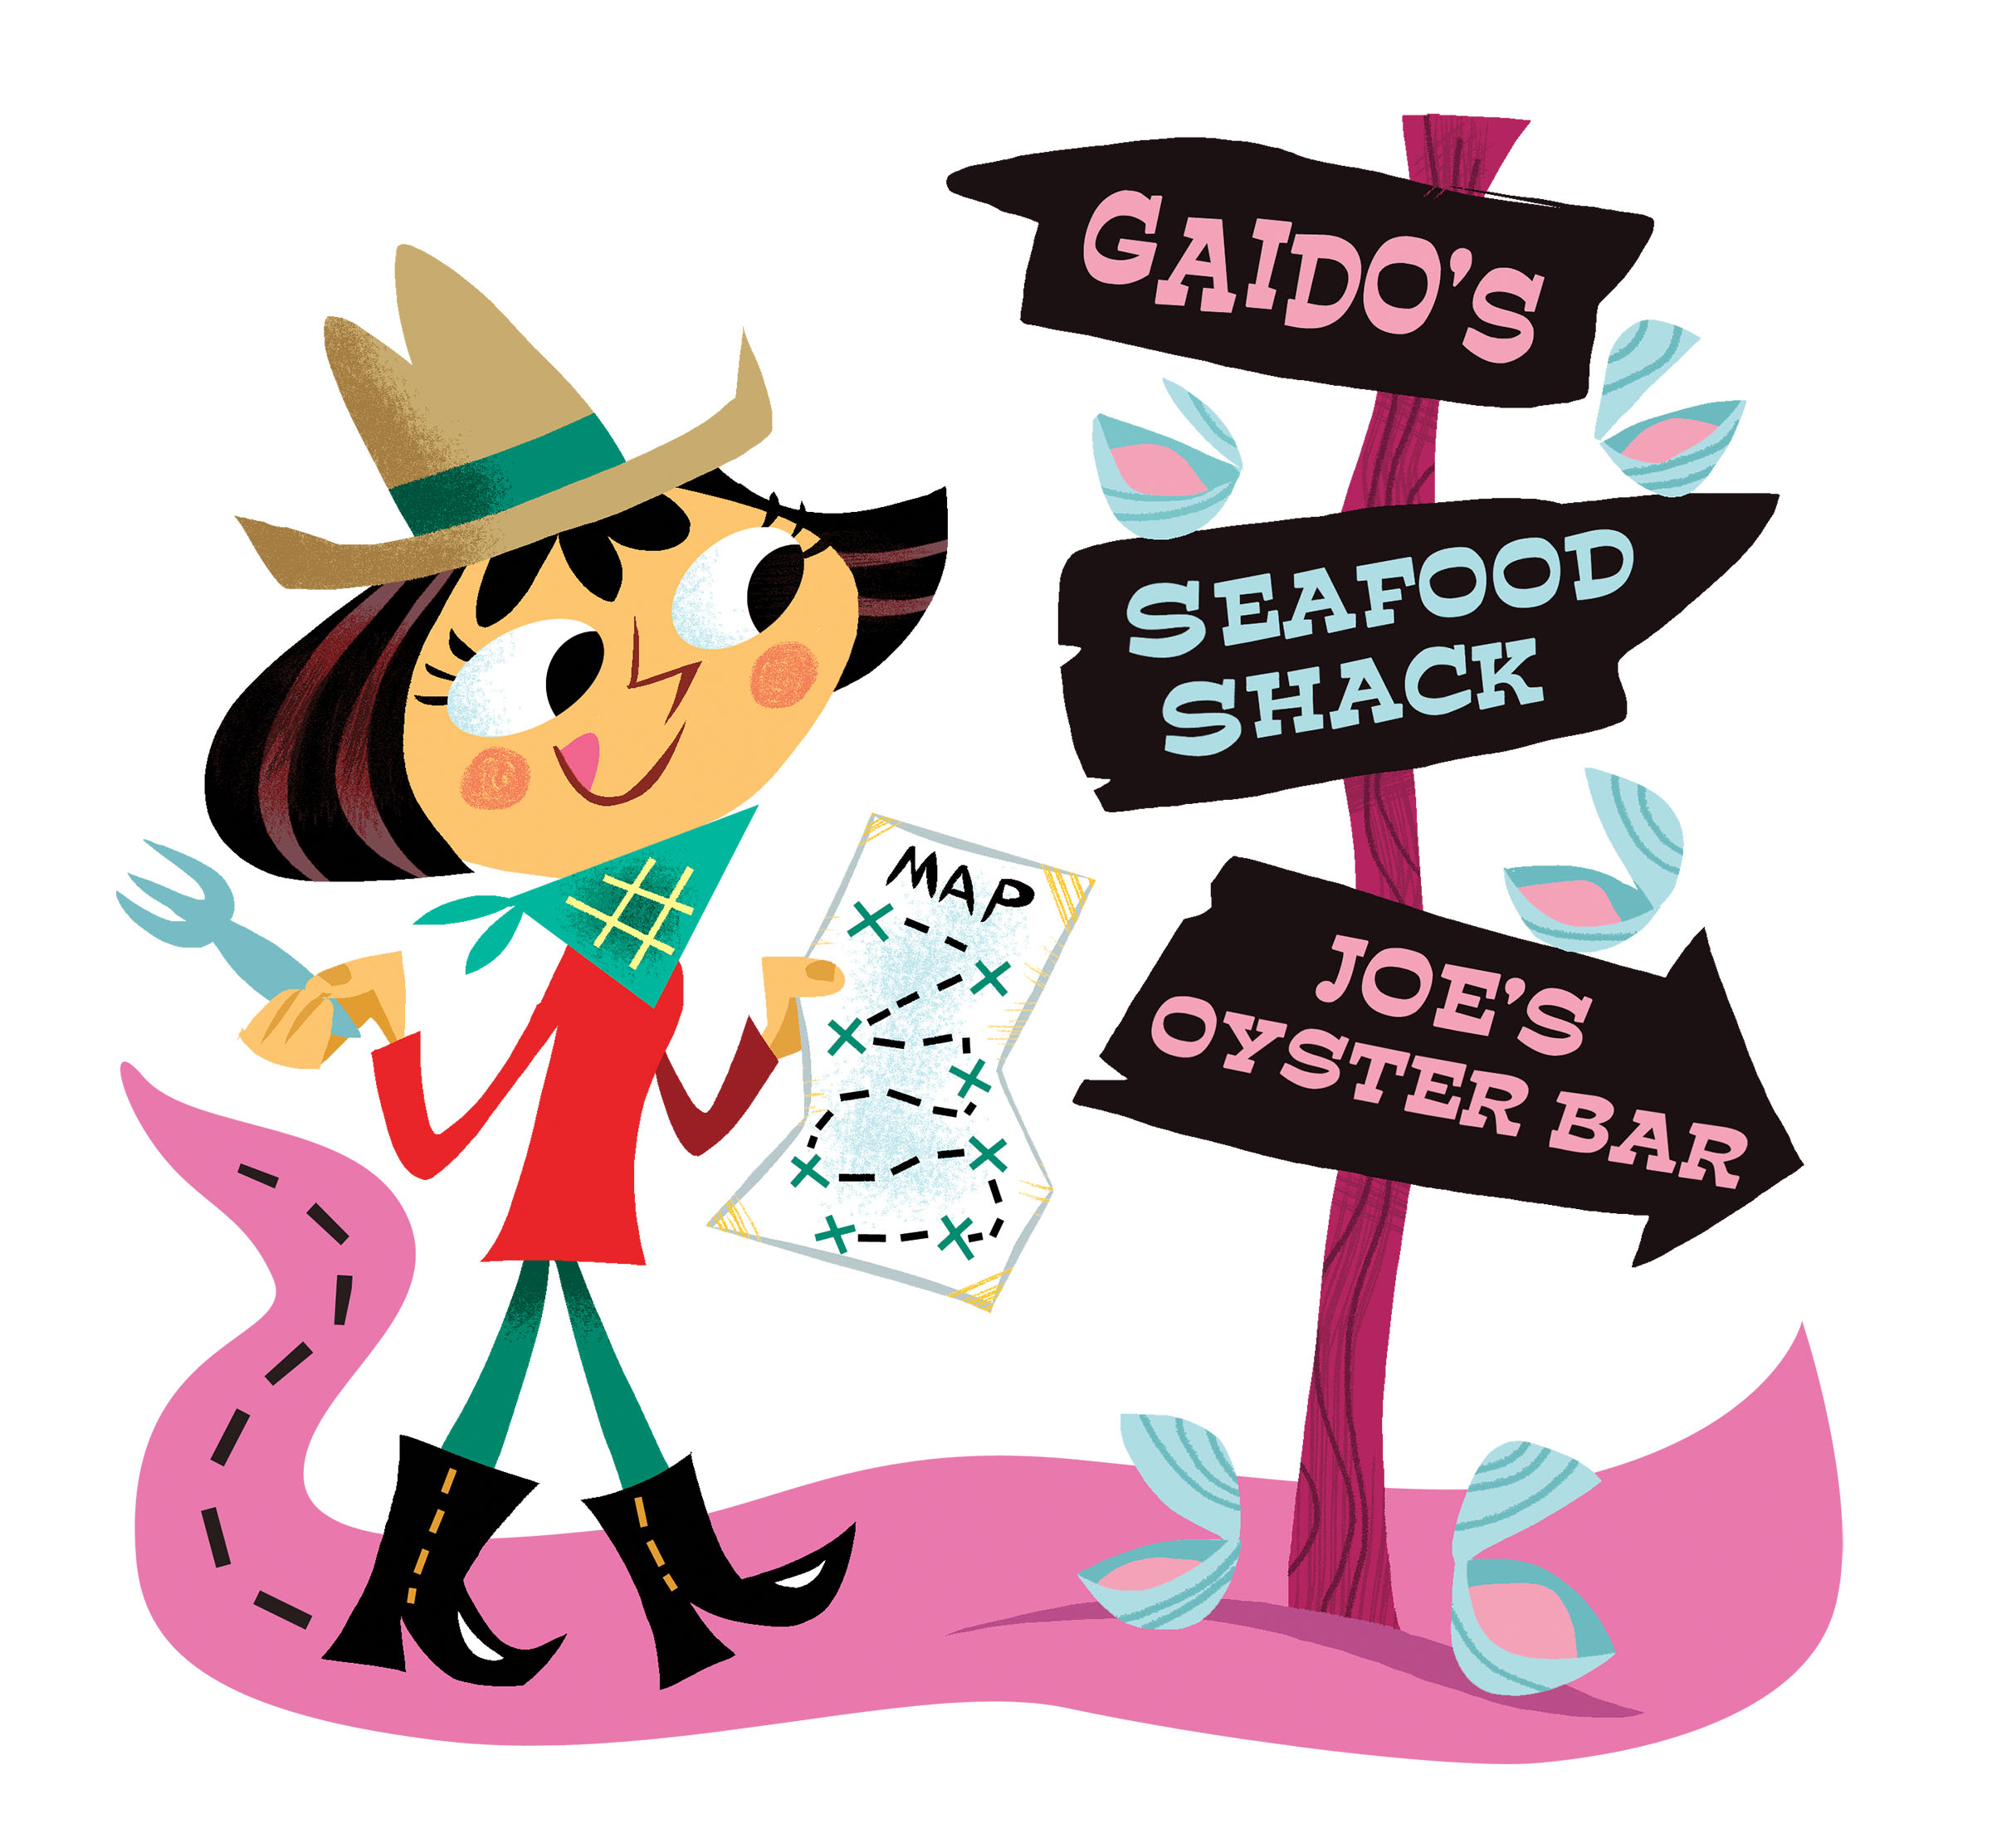 A cartoon illustration of a woman in a cowboy hat looking at a wayfinding sign reading "Gaido's / Seafood Shack / Joe's Oyster Bar"